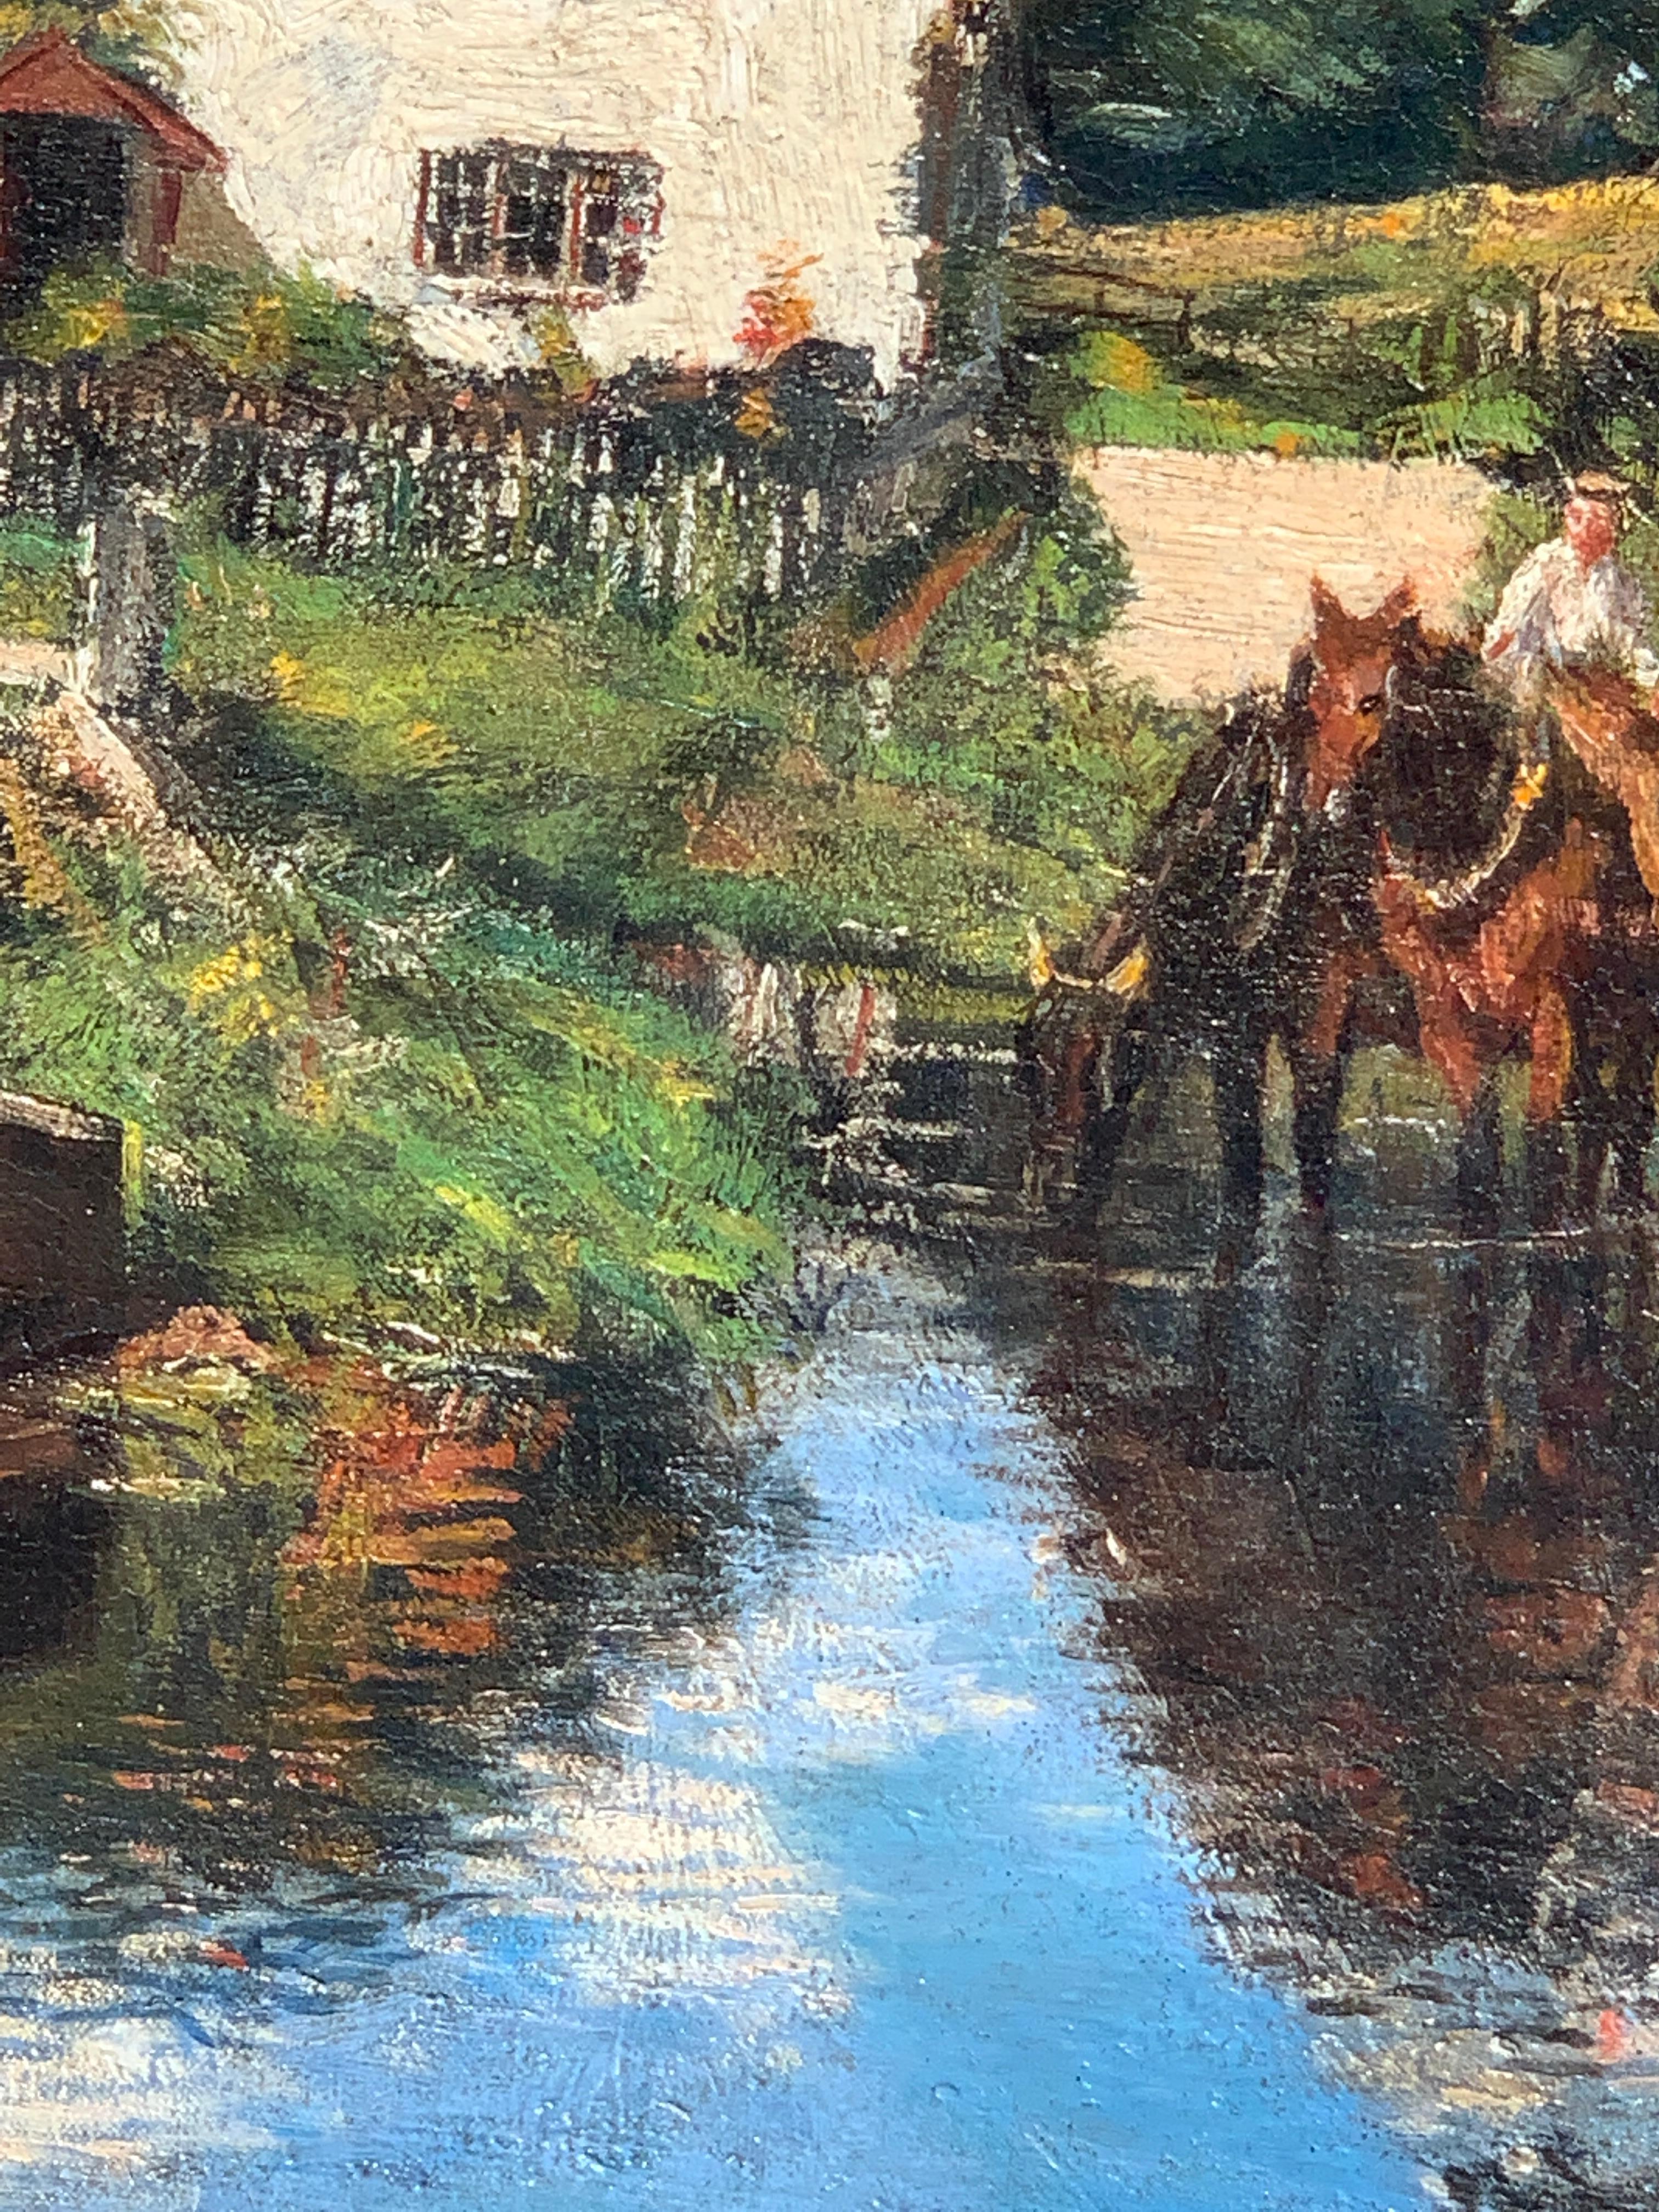 Oil painting, 19th century English scene of Children with horses Newlyn Cornwall - Brown Figurative Painting by Fairly Harmer